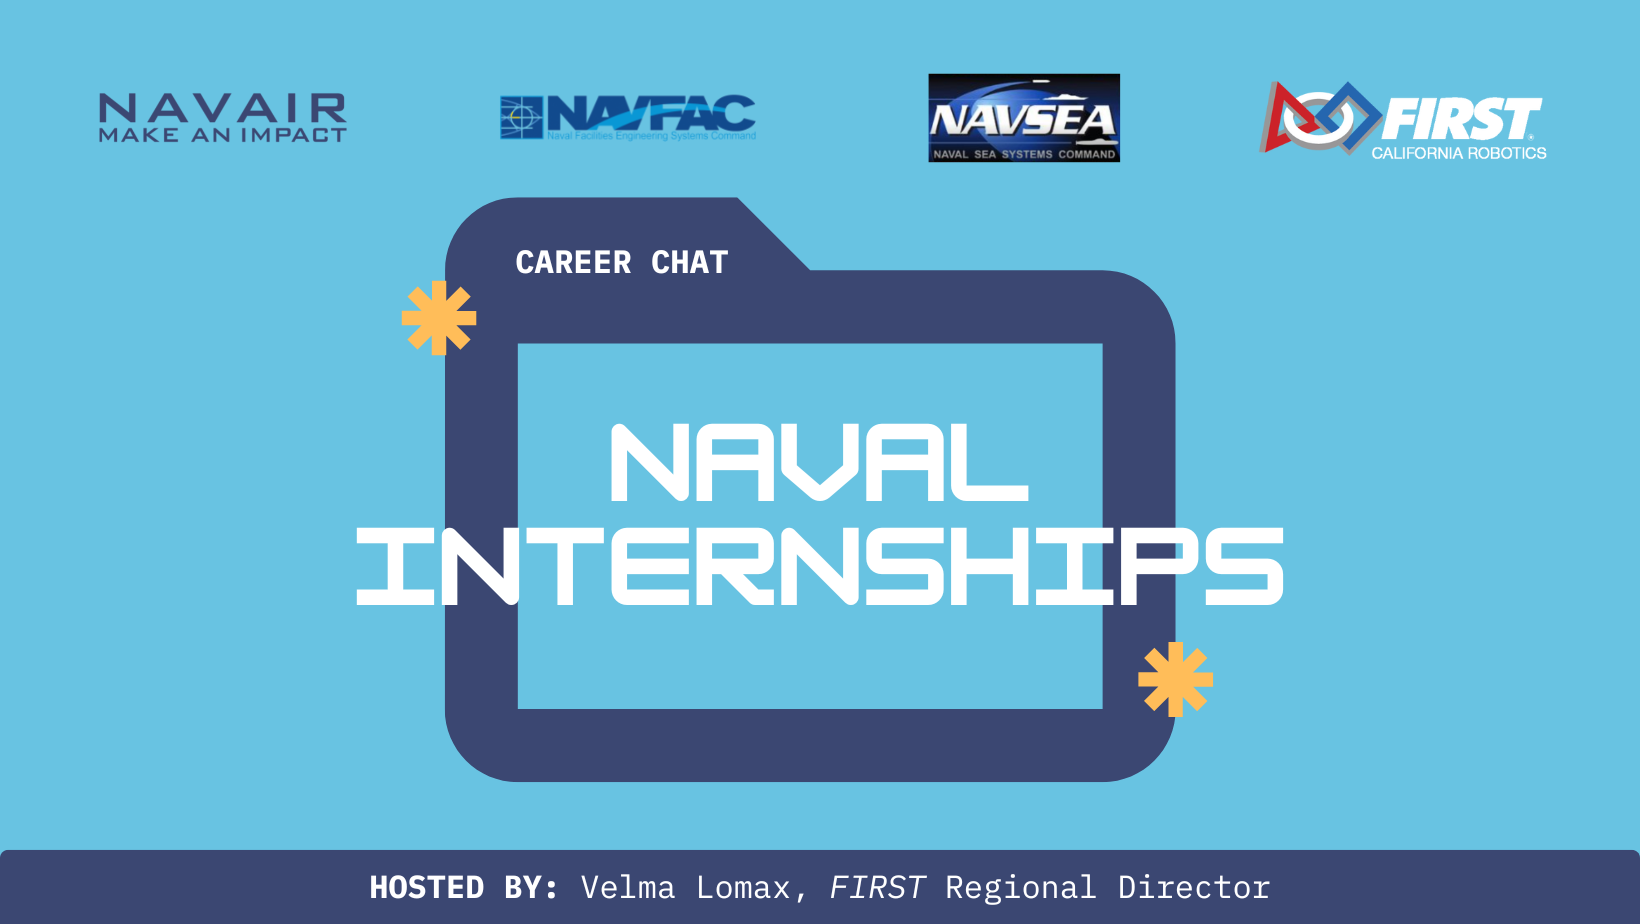 Naval Internships and Career Opportunities